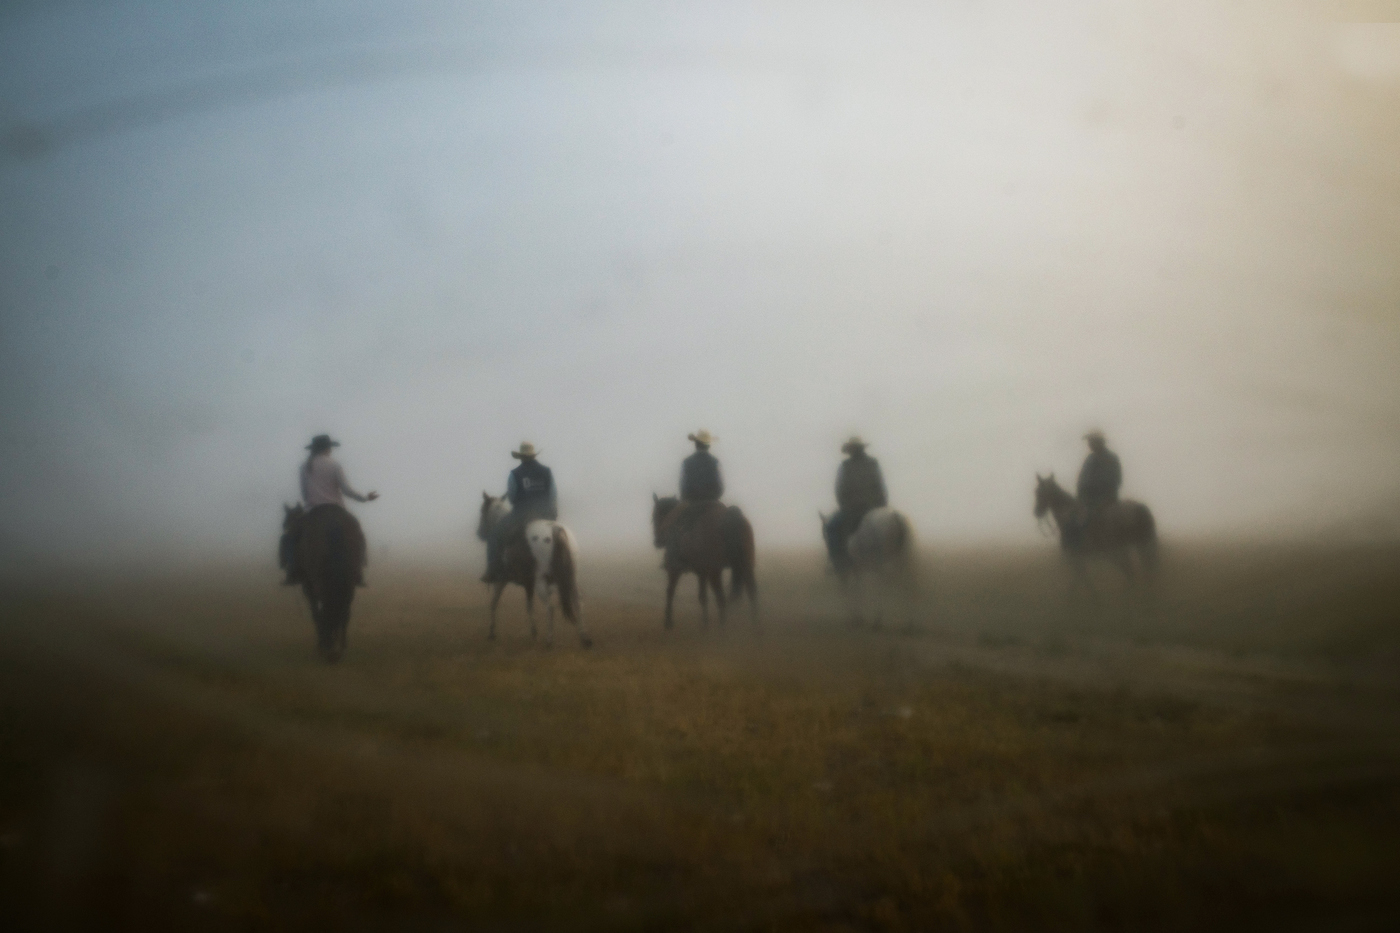  45º25'37.9"N, 102º17'10.7"W. 113 miles from the nearest McDonald's. The Arneson family and their employee Riley Cihak ride their horses through thick morning fog on their ranch in the old town of Chance, SD. The Arnesons family moved from Montana to